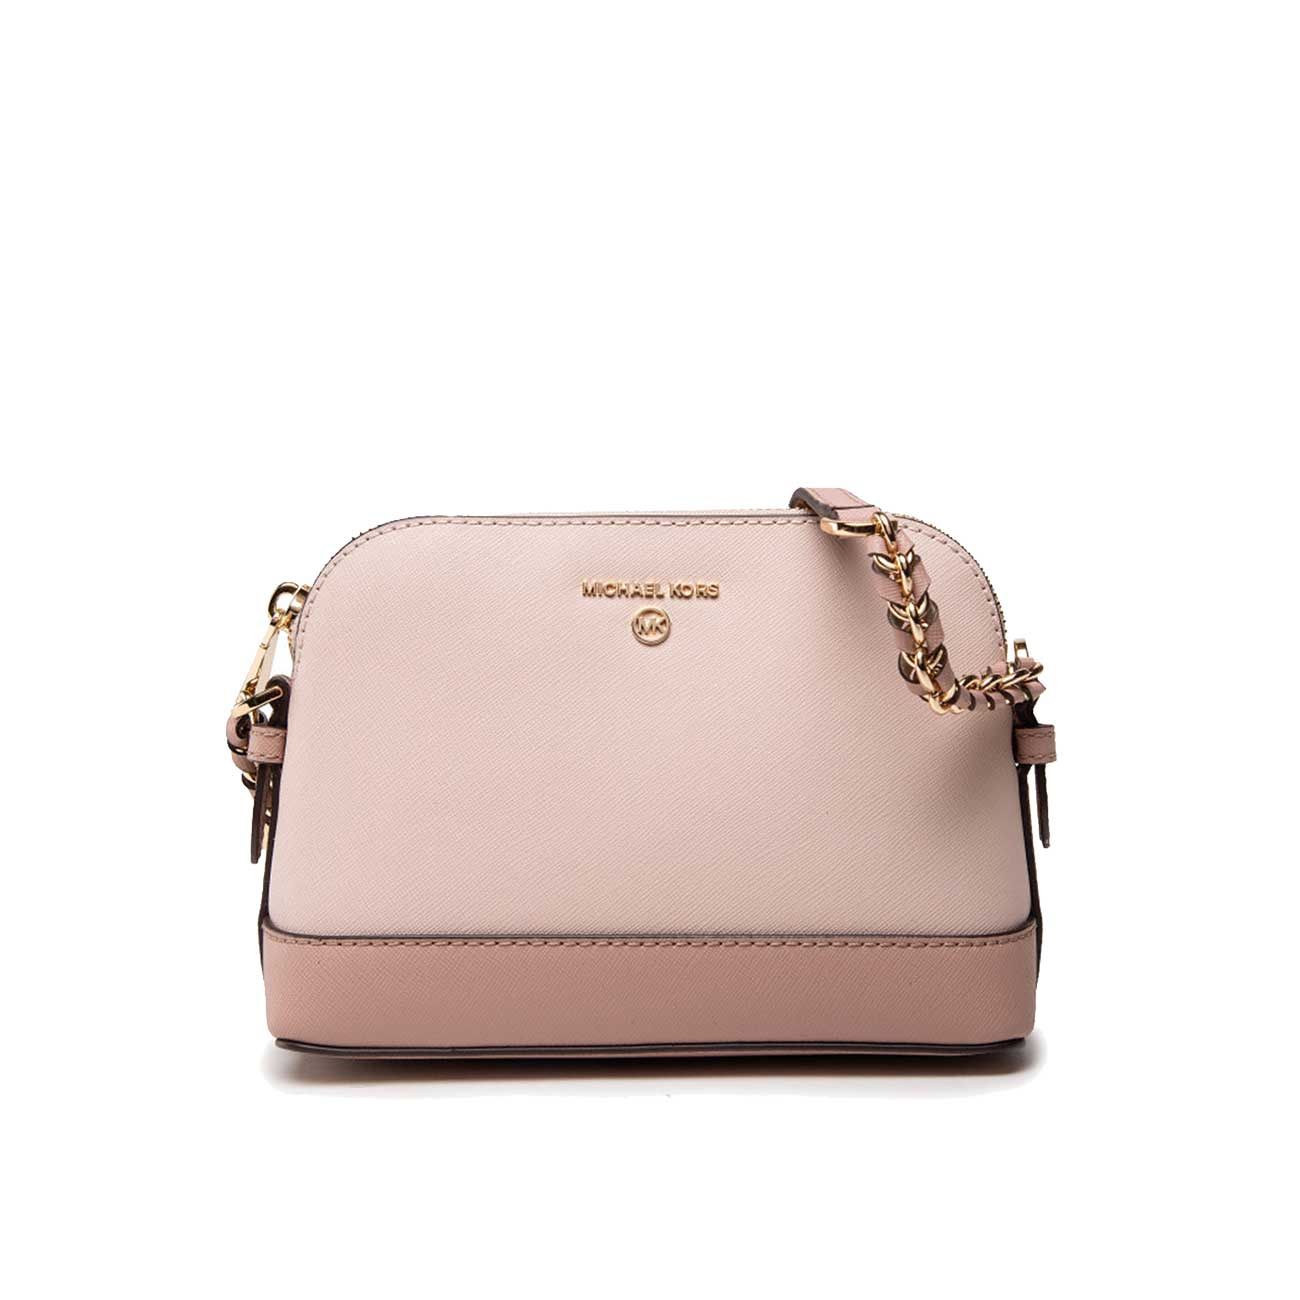 MICHAEL KORS DOME SMALL CROSSOBDY Woman Soft Pink Fawn